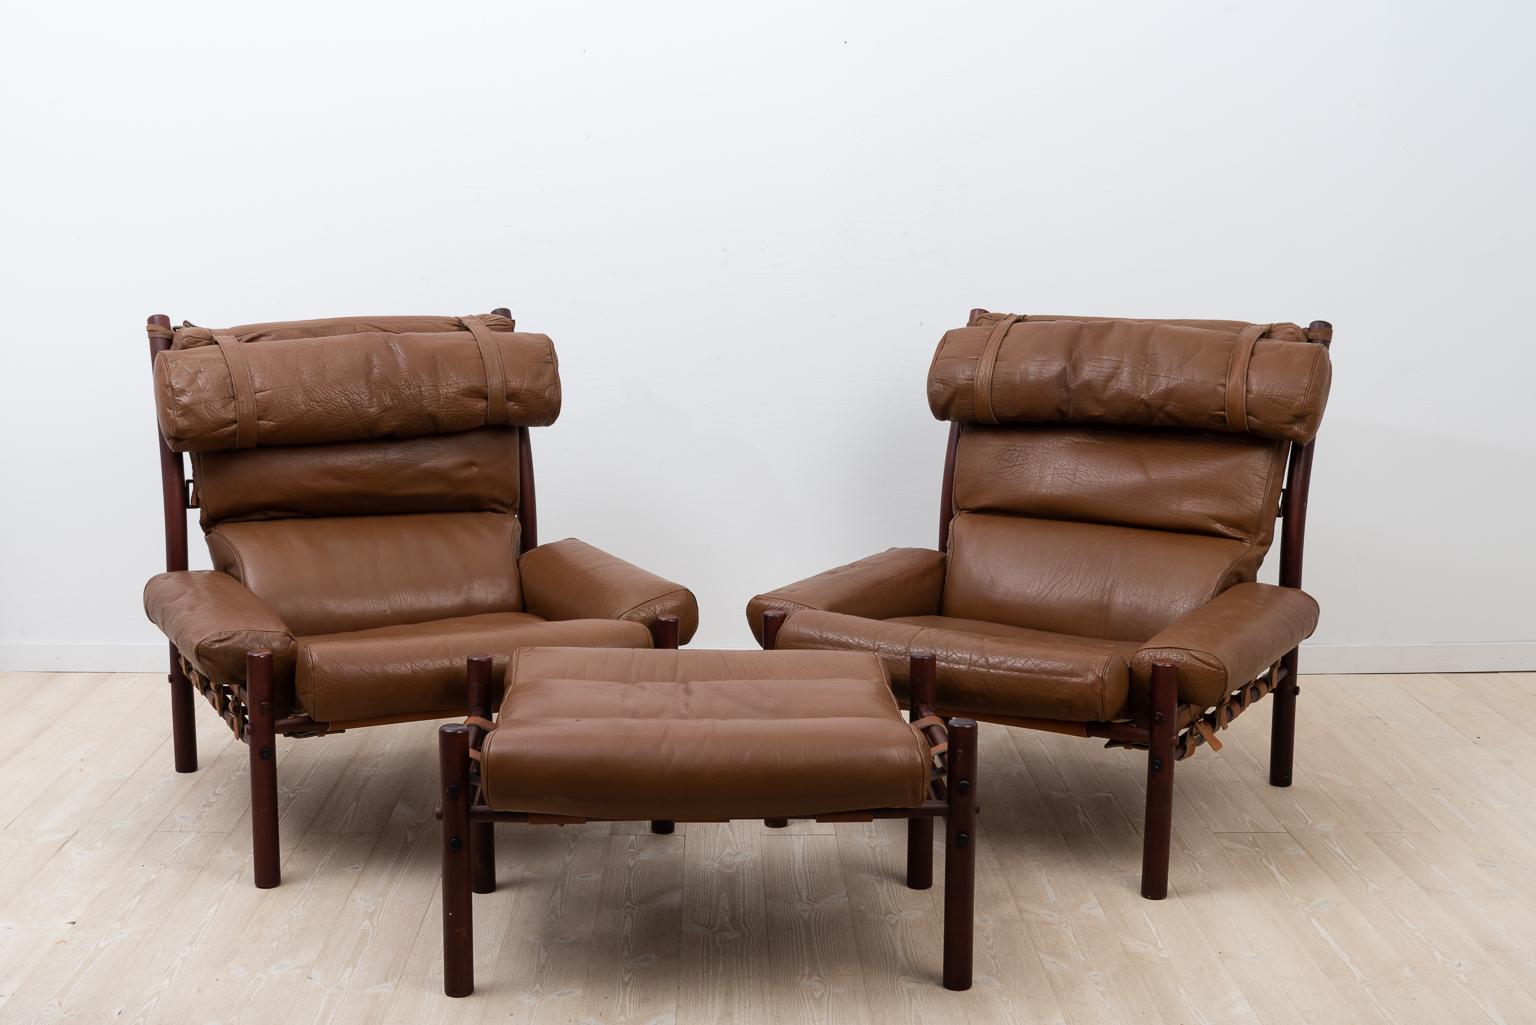 Set of two inca armchairs and appurtenant ottoman. Designed by Arne Norell in 1971 and produced by Norell Möbler during the 1970s. 

The upholstery is the original dark brown, buffalo leather and it's in very good condition. The frames are